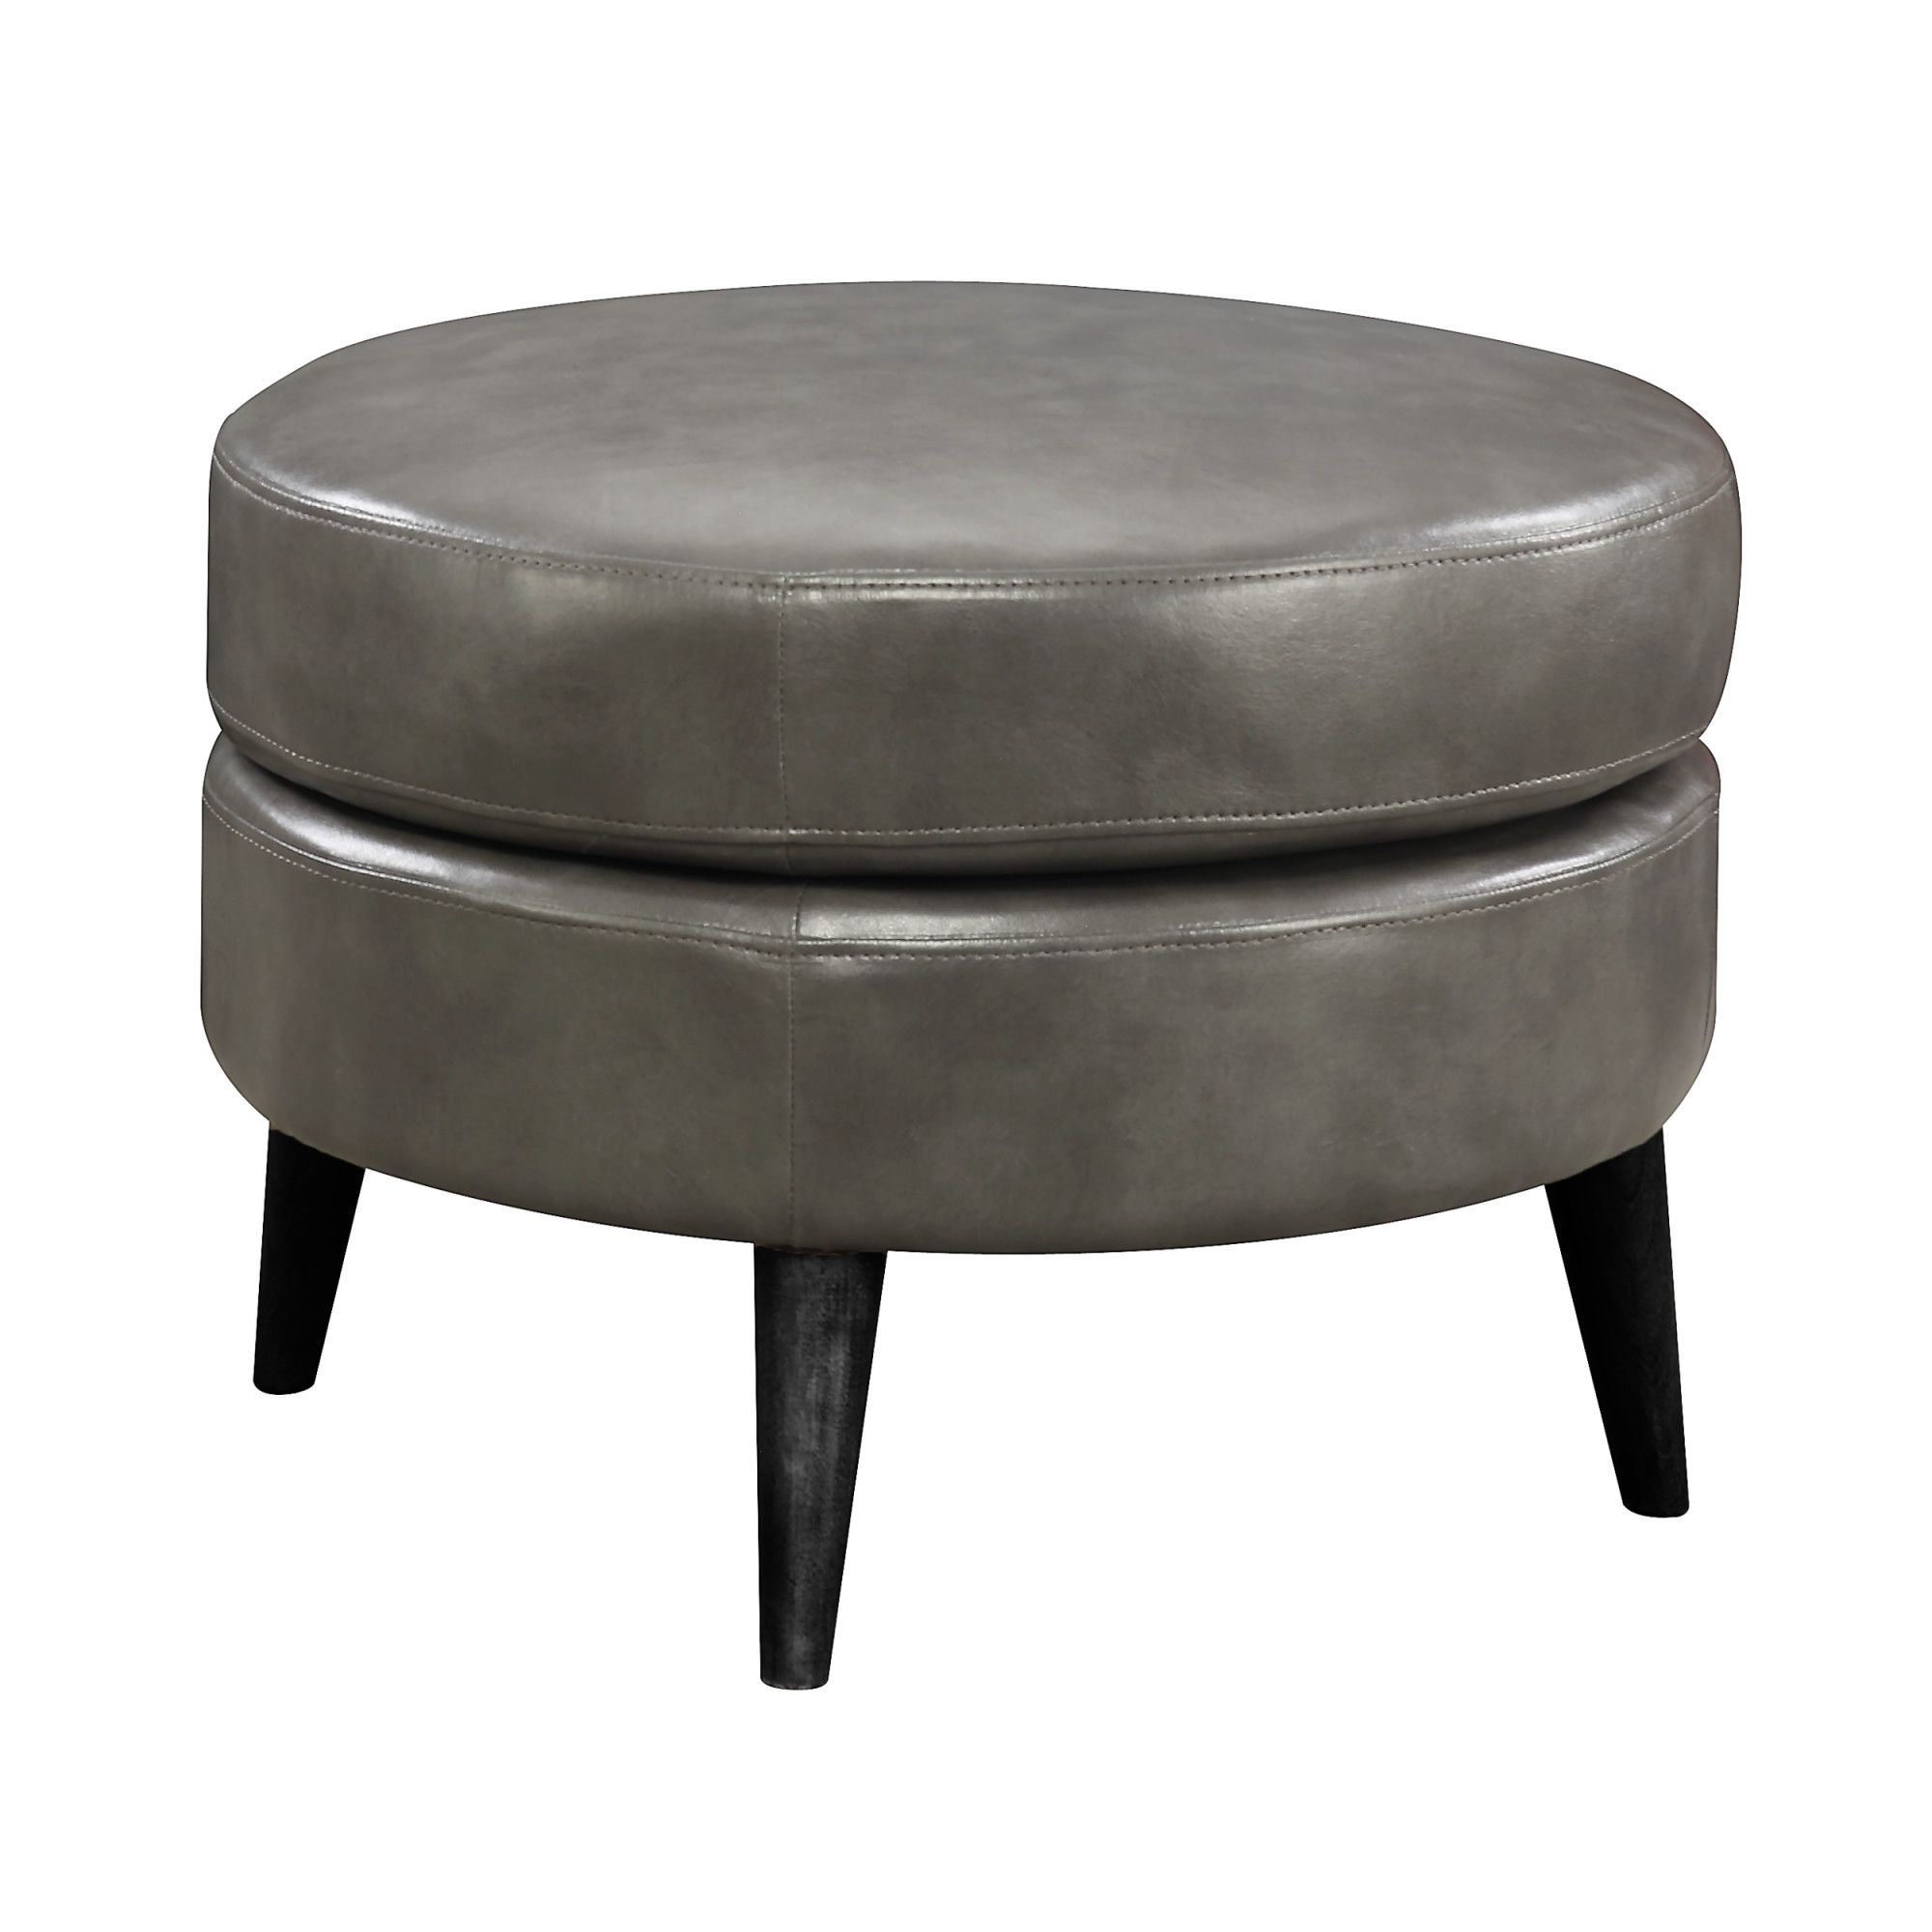 Emerald Home Oscar Gray Ottoman With Faux Leather Upholstery, Fixed For Medium Gray Leather Pouf Ottomans (View 15 of 20)